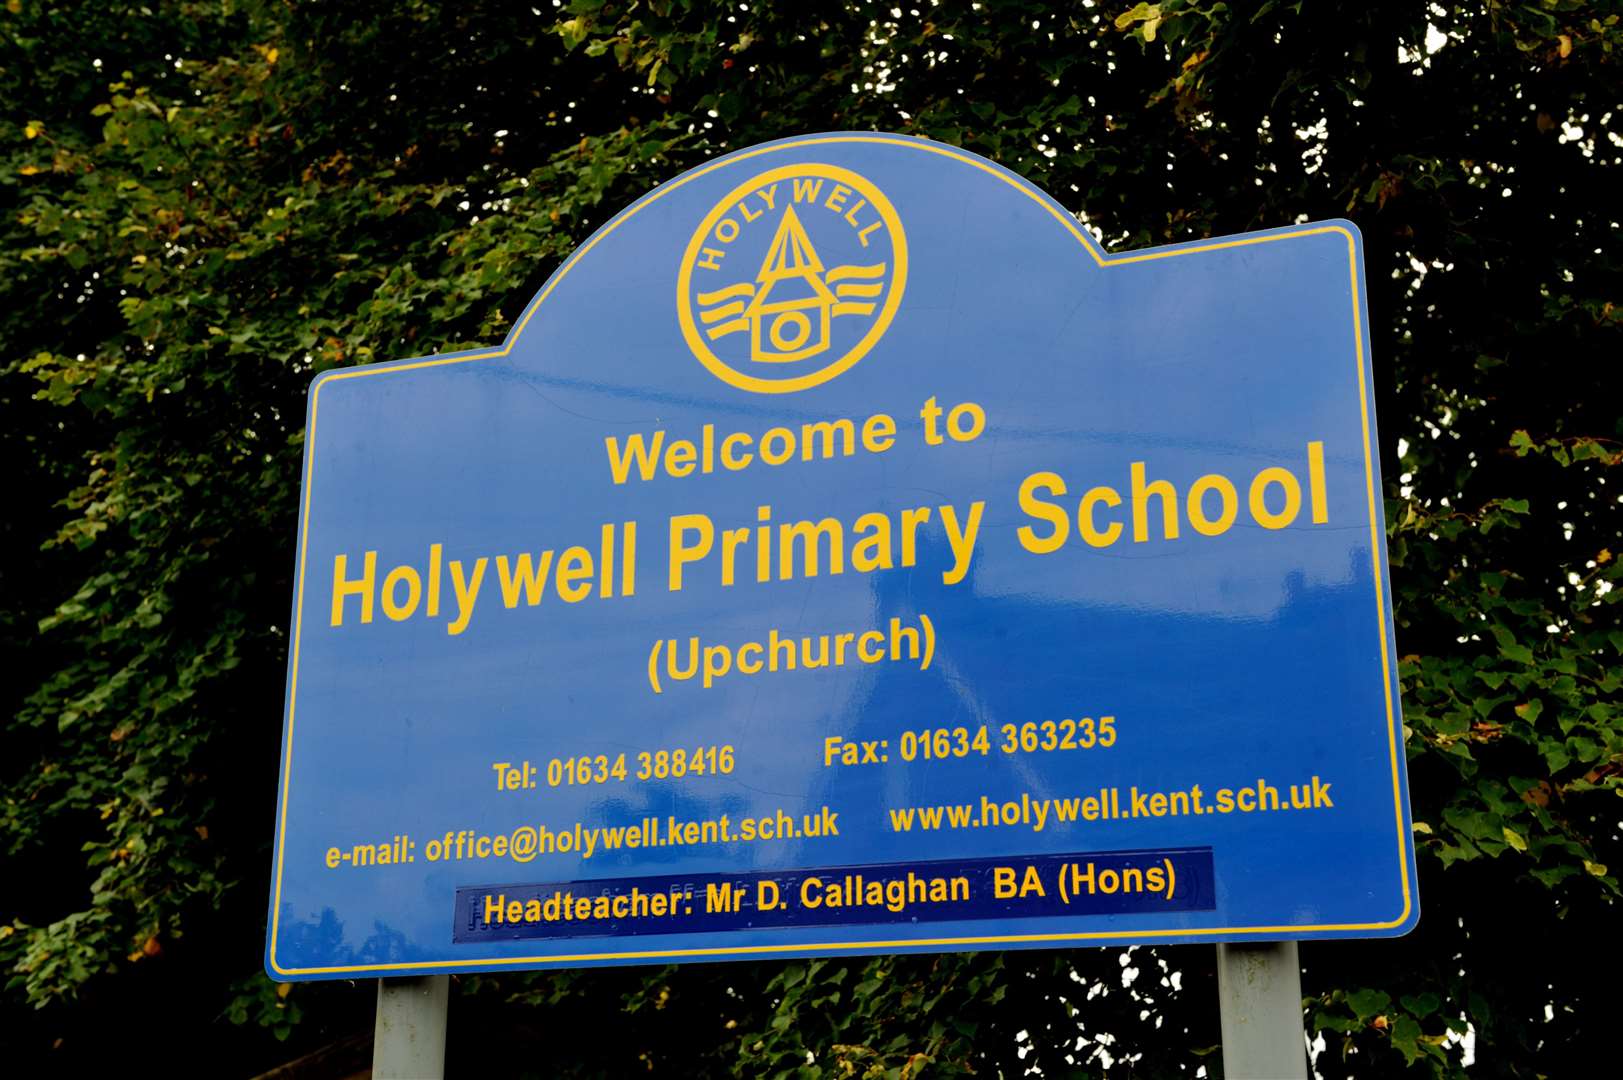 Parents of pupils at Holywell Primary School have raised concerns about the potential risk of coronavirus